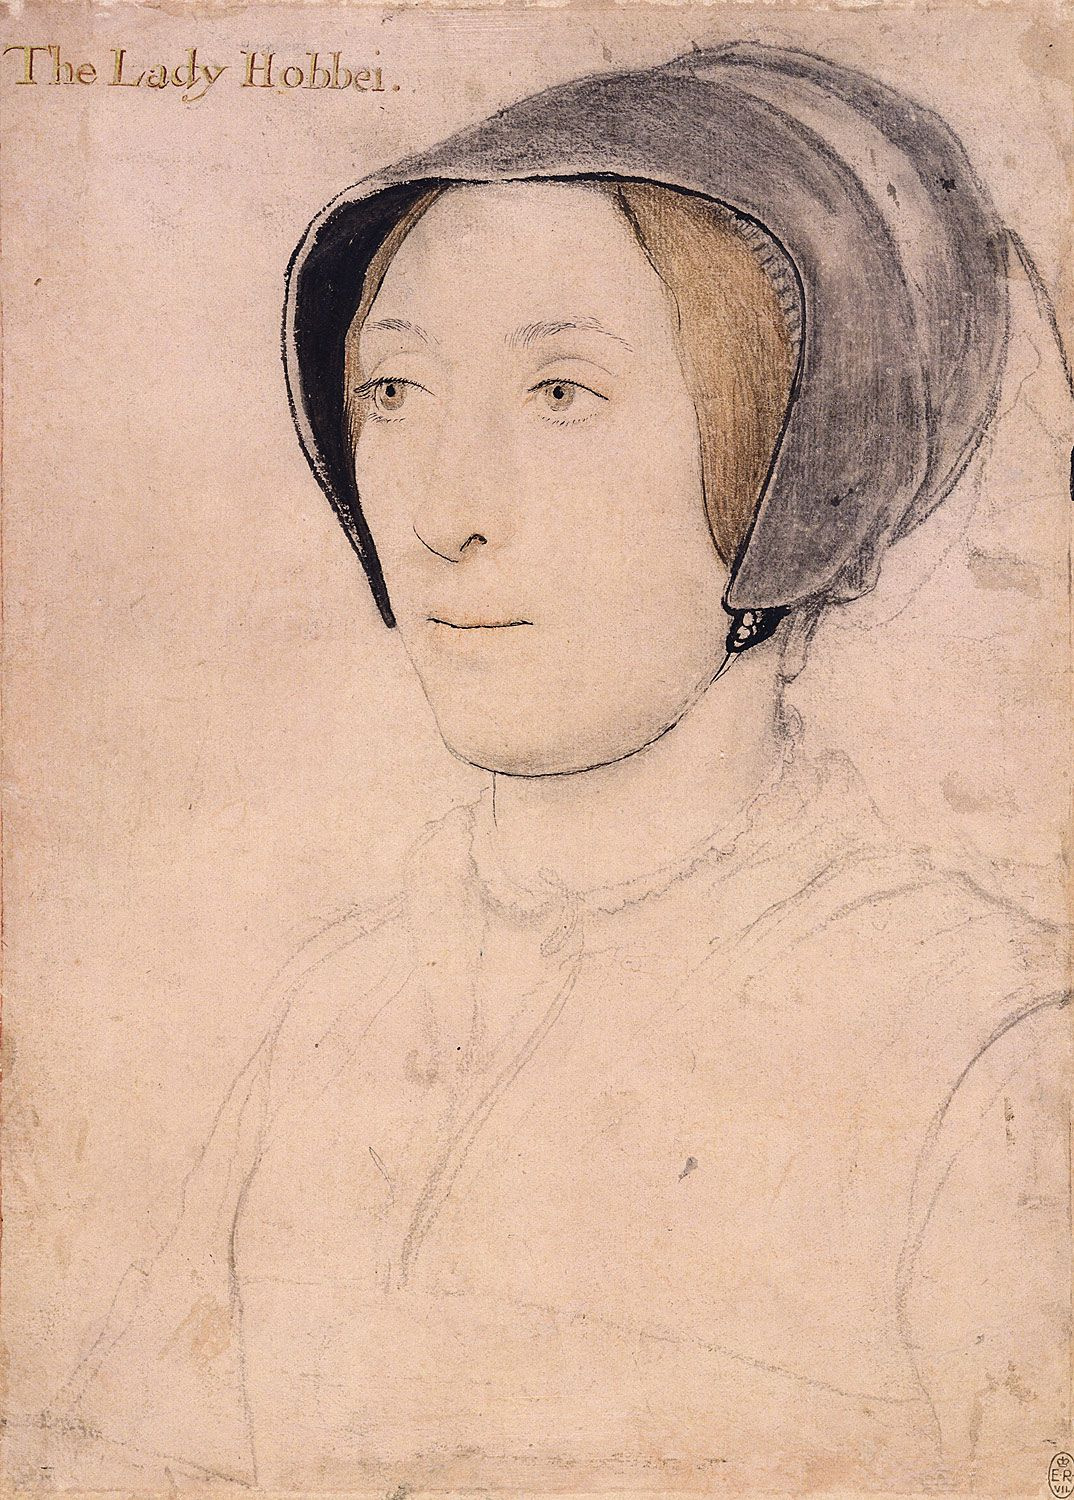 1536 - Lady Hoby by Holbein the Younger